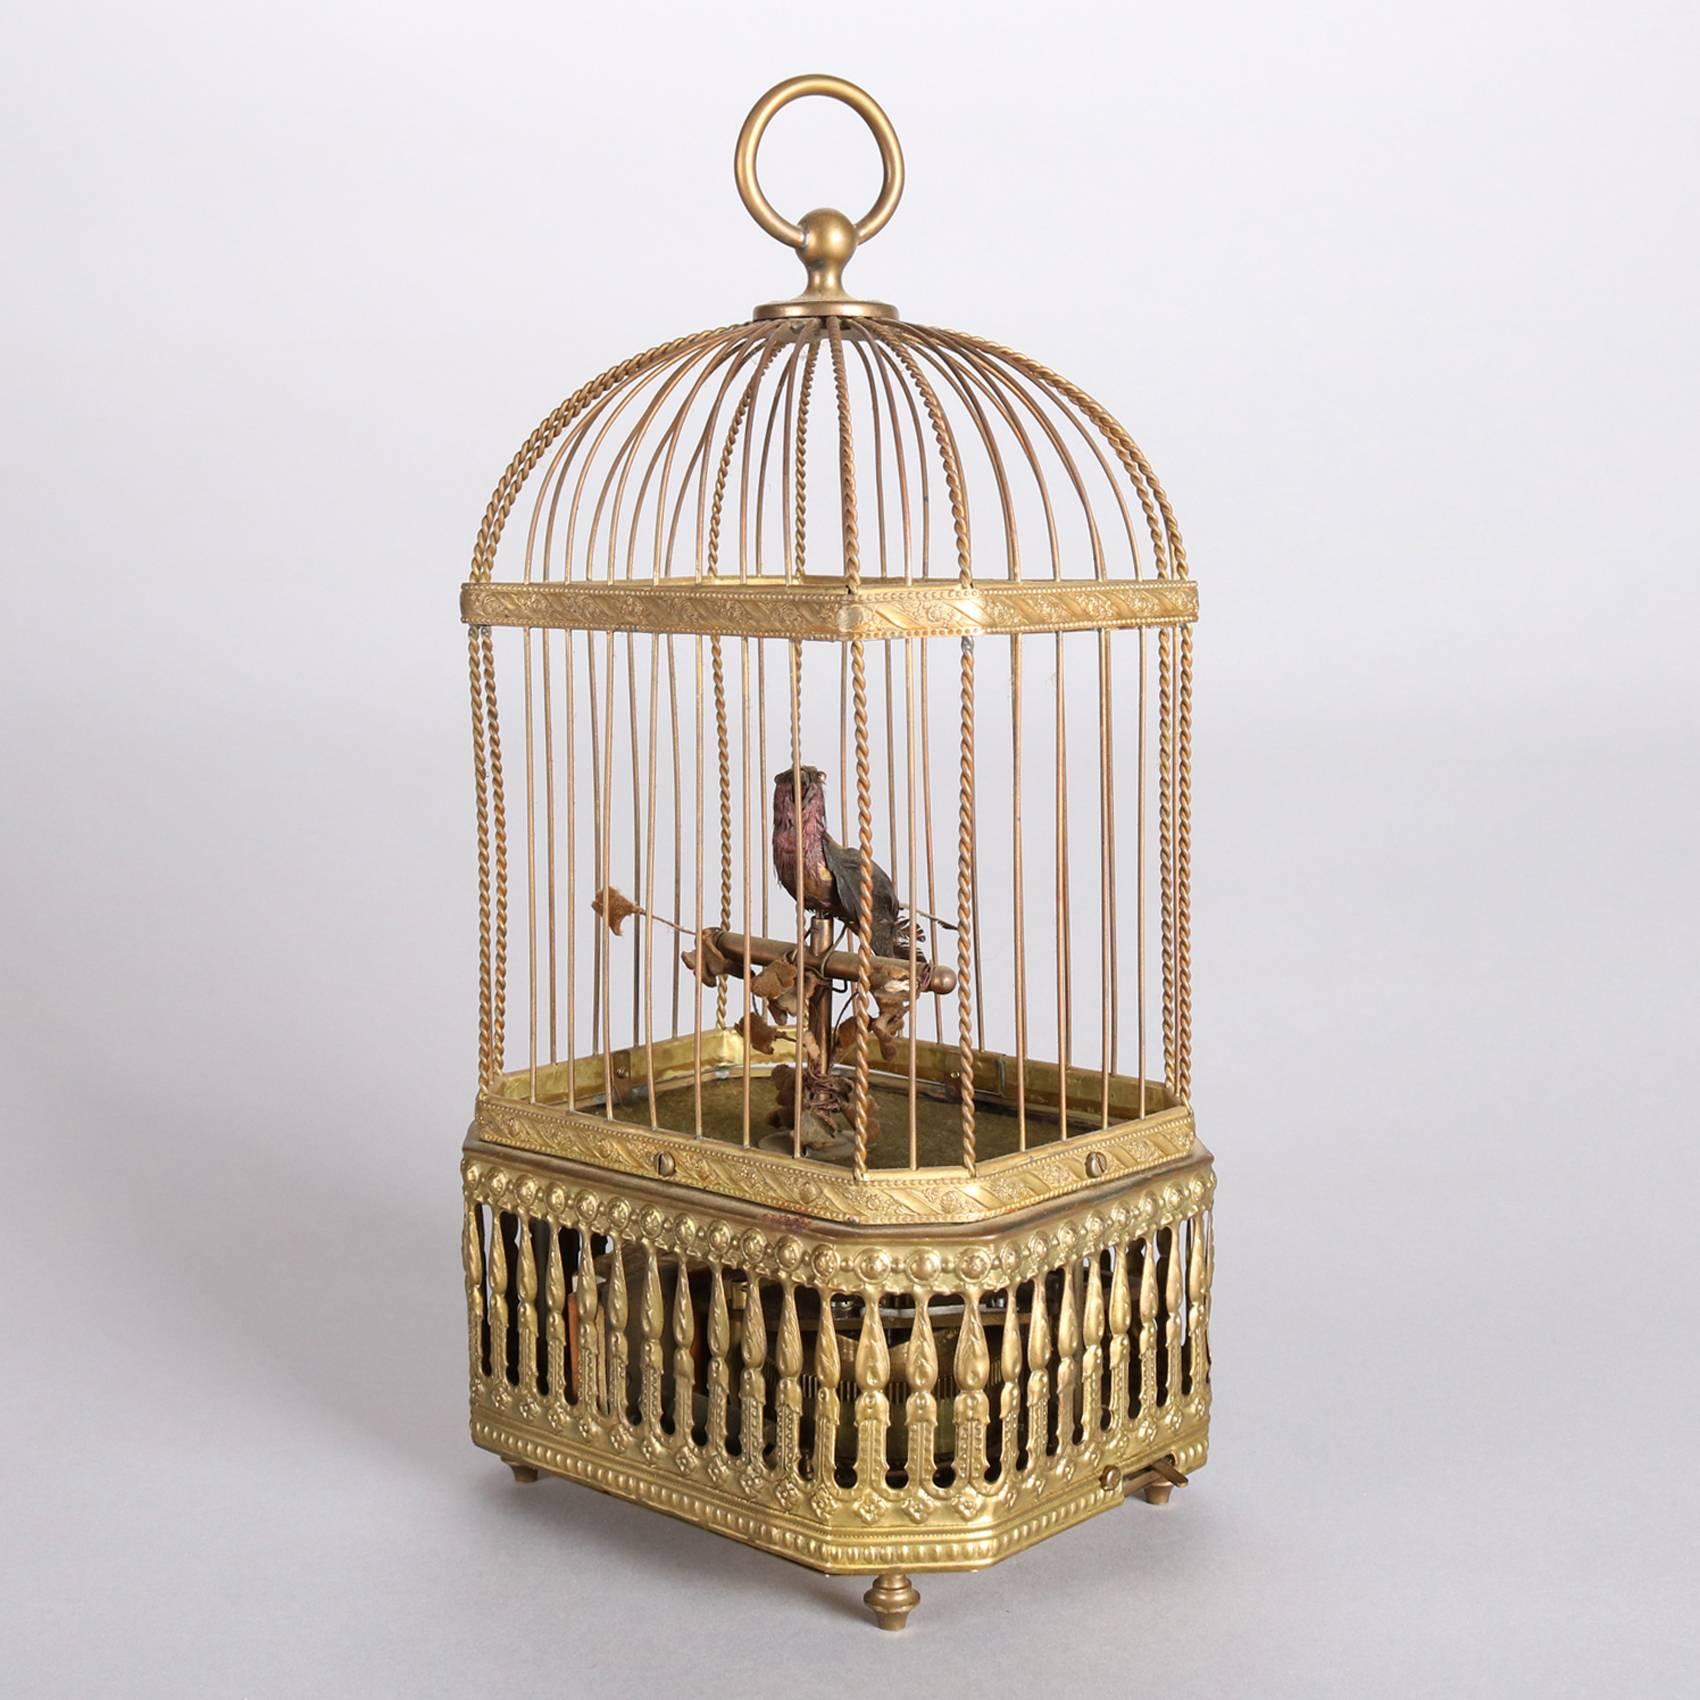 Vintage German automaton features singing and animated bird in gilt metal cage, 